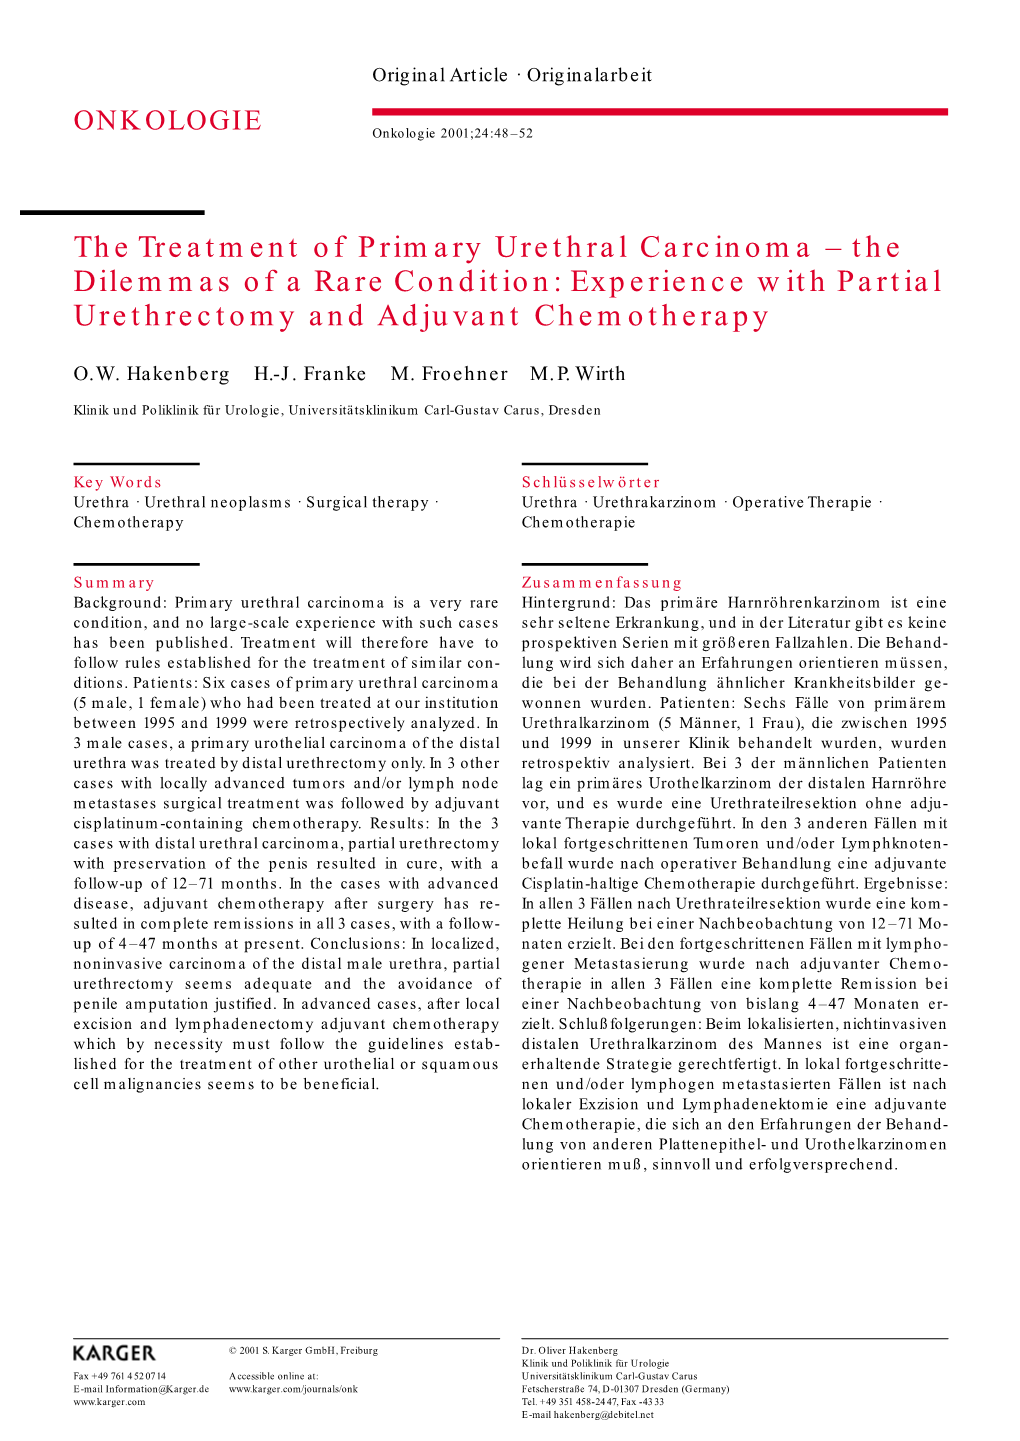 The Treatment of Primary Urethral Carcinoma – the Dilemmas of a Rare Condition: Experience with Partial Urethrectomy and Adjuvant Chemotherapy